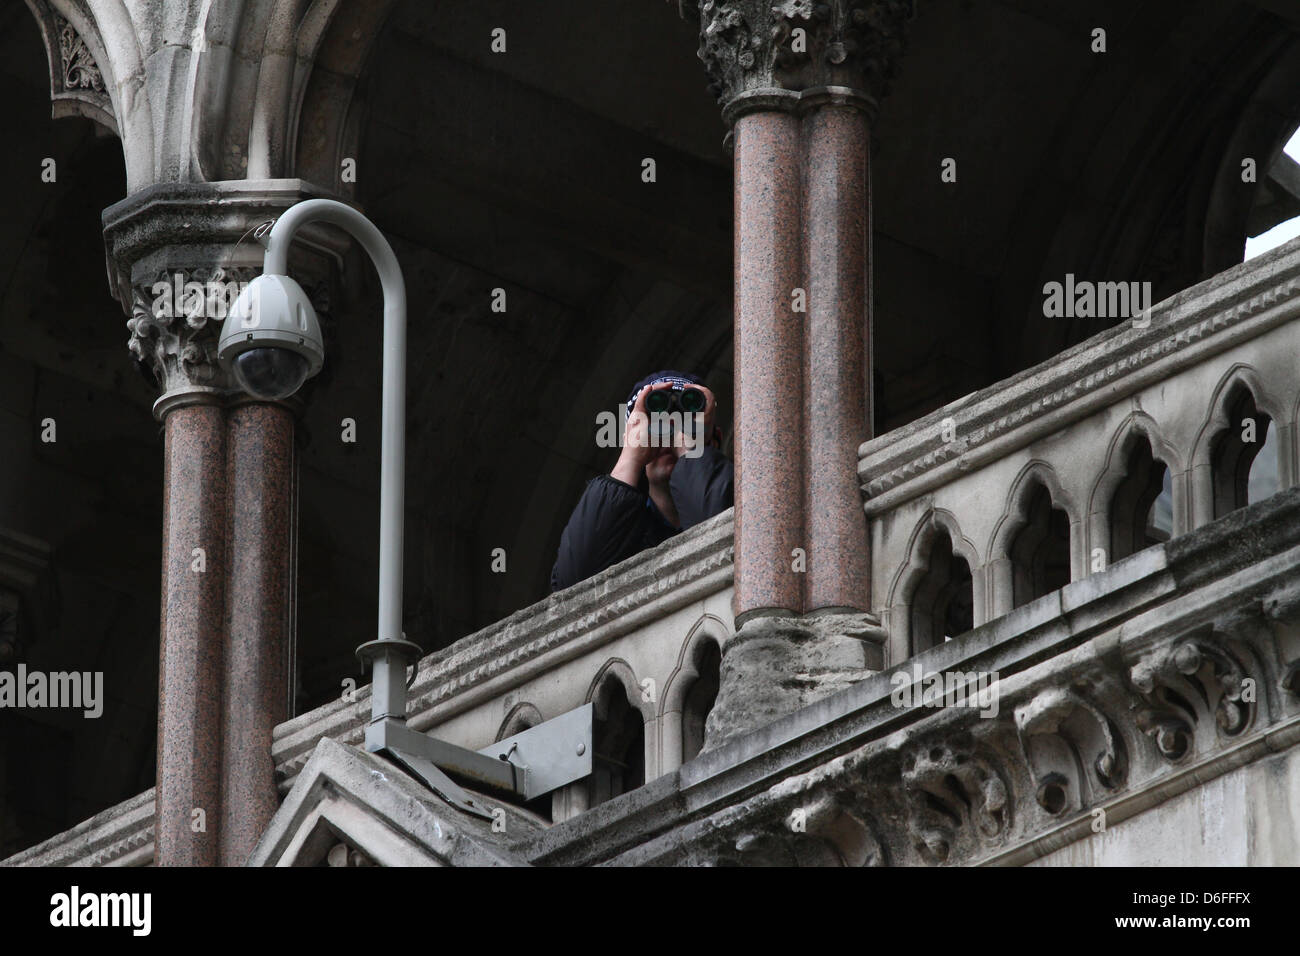 London, UK. 17th April 2013. The Funeral of Baroness Margaret Thatcher. A police spotter with binoculars at the Royal Courts of Justice. The Funeral service takes place in St. Paul's Cathedral, London. Pic: Paul Marriott Photography/Alamy Live News Stock Photo